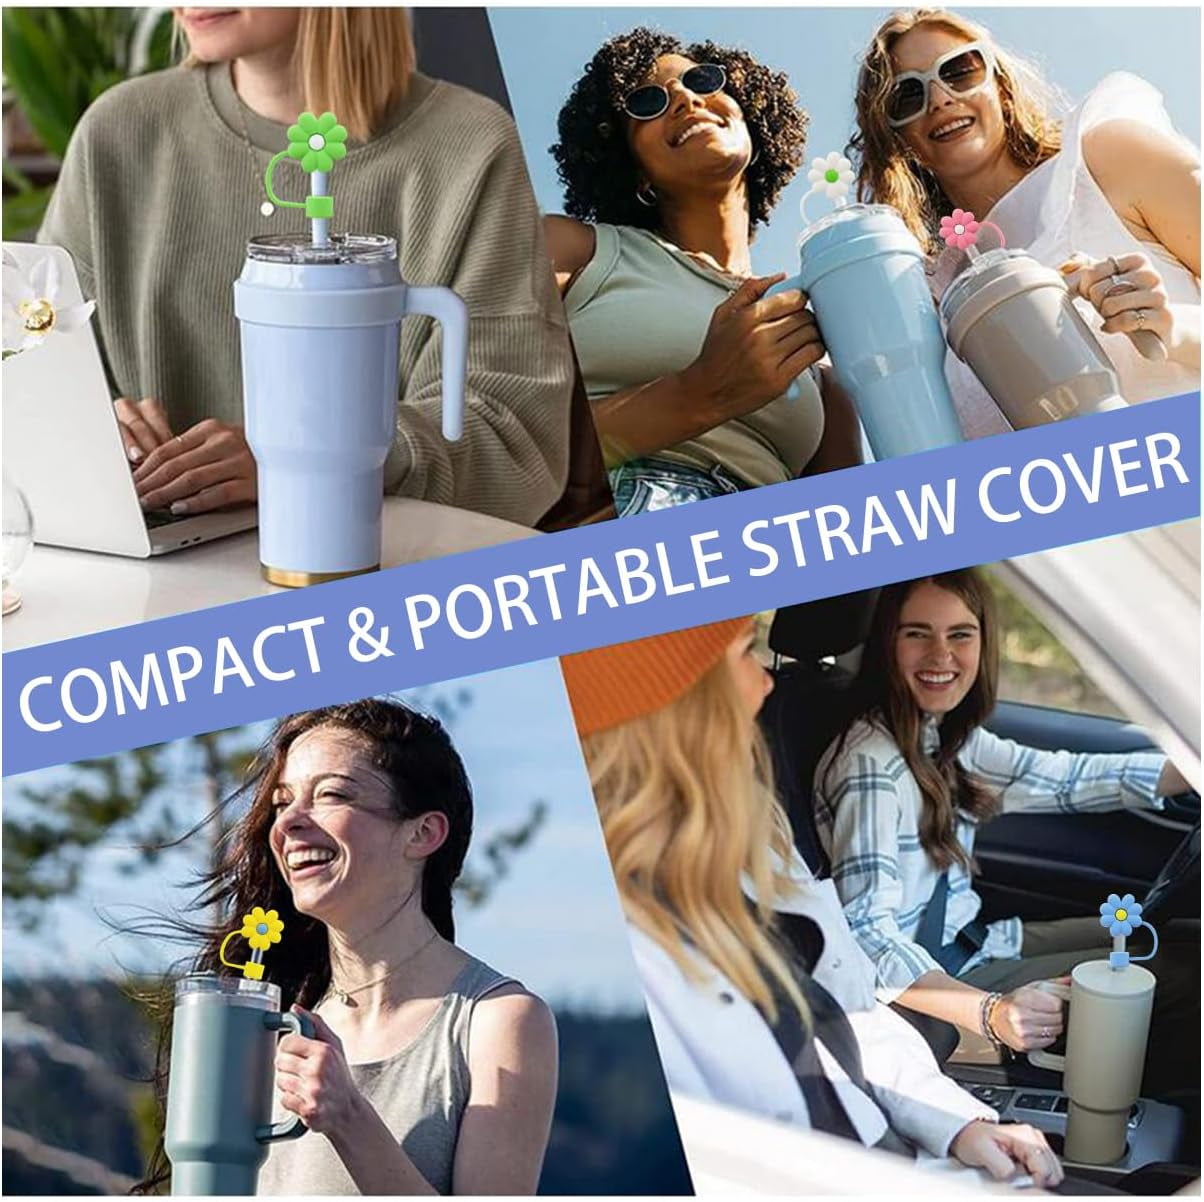 Straw Covers Cap for Stanley Cup - 10mm Straw Covers for Reusable Straws for Simple Modern 40 oz Tumbler & Stanley 40 oz Tumbler, Green Plants and